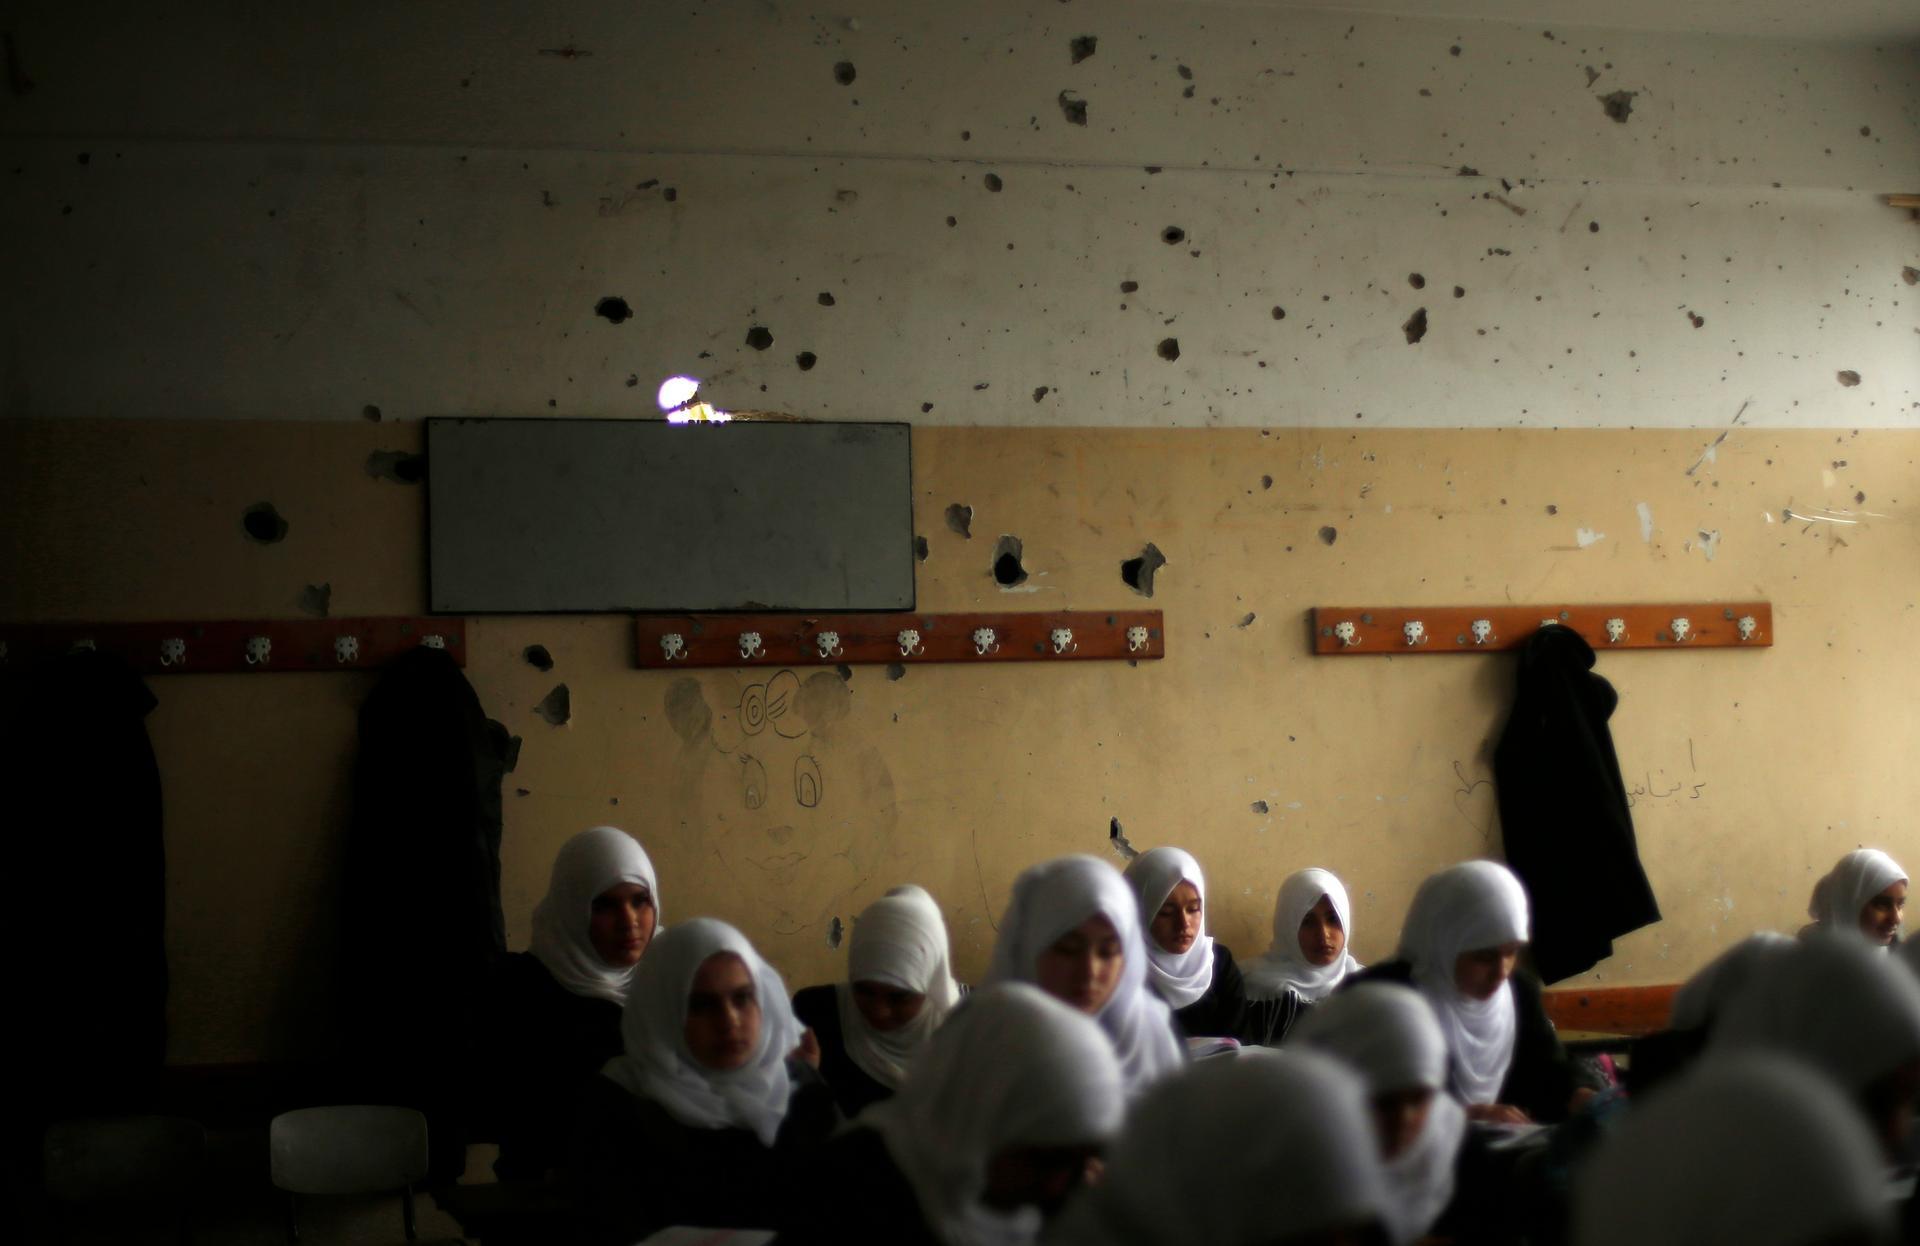 Palestinian school girls attend a class at their school that witnesses said was damaged by Israeli shelling during the most recent conflict between Israel and Hamas.